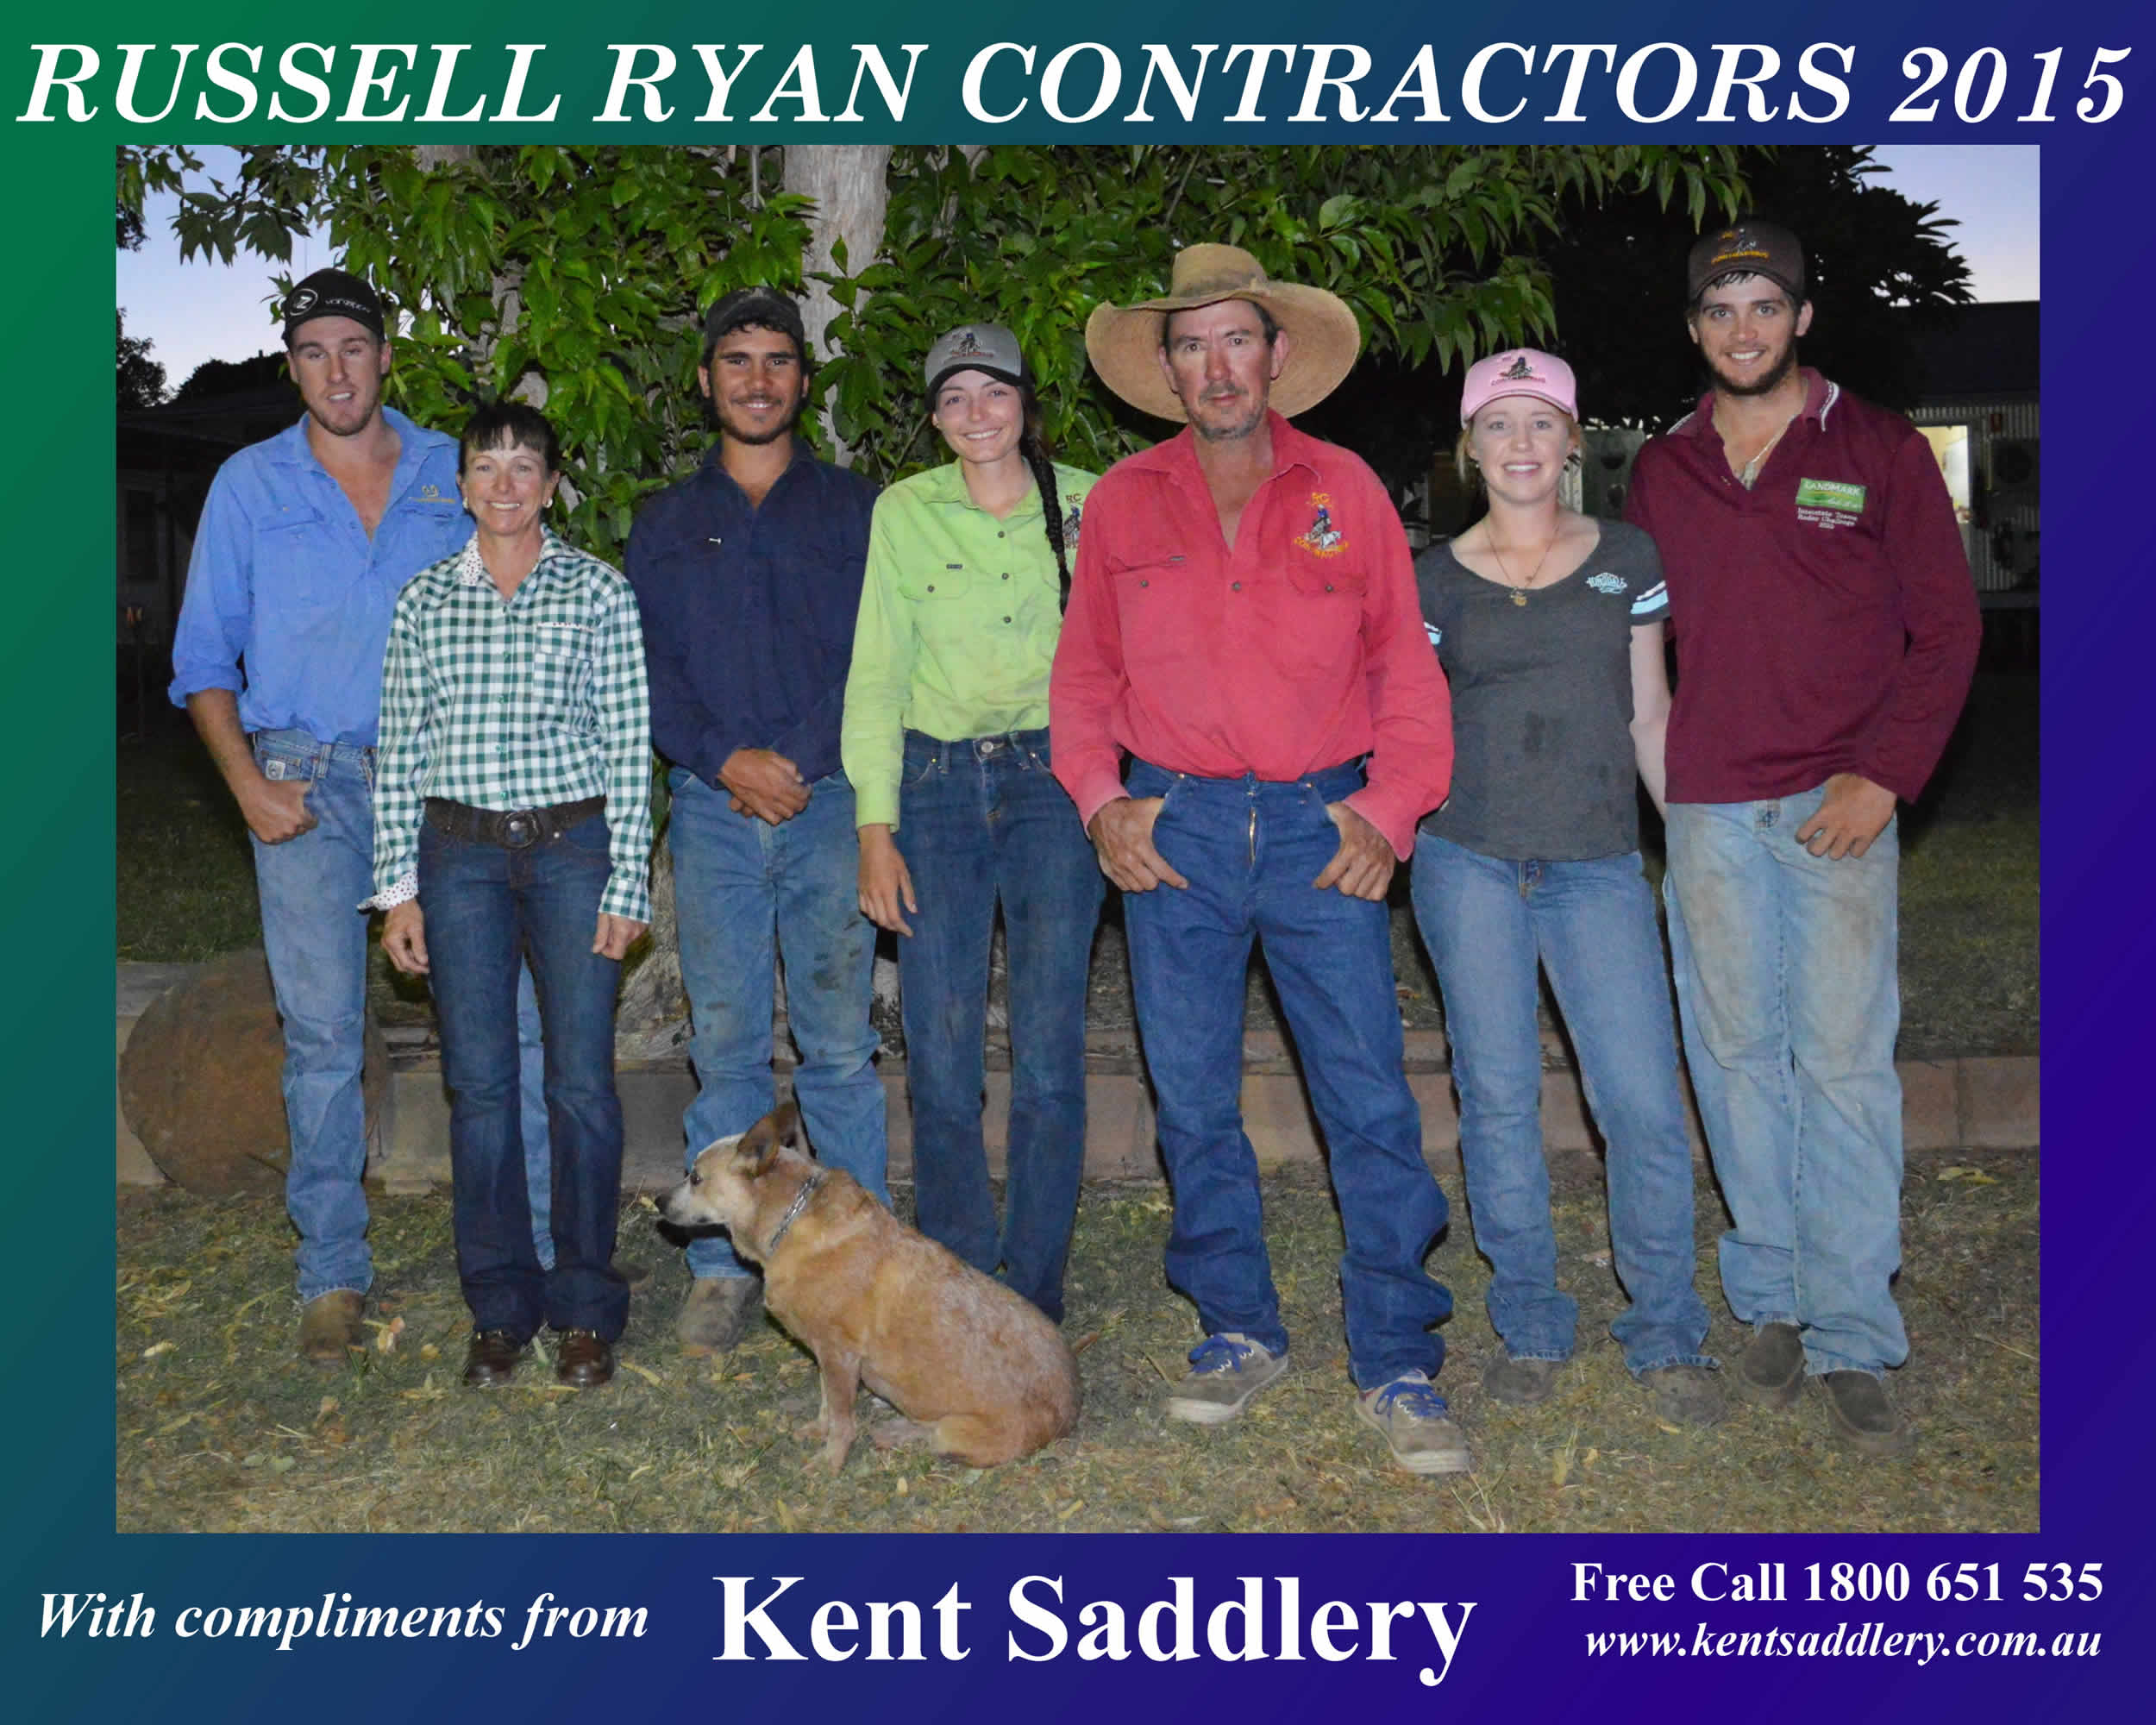 Drovers & Contractors - Russell Ryan Contractor 10